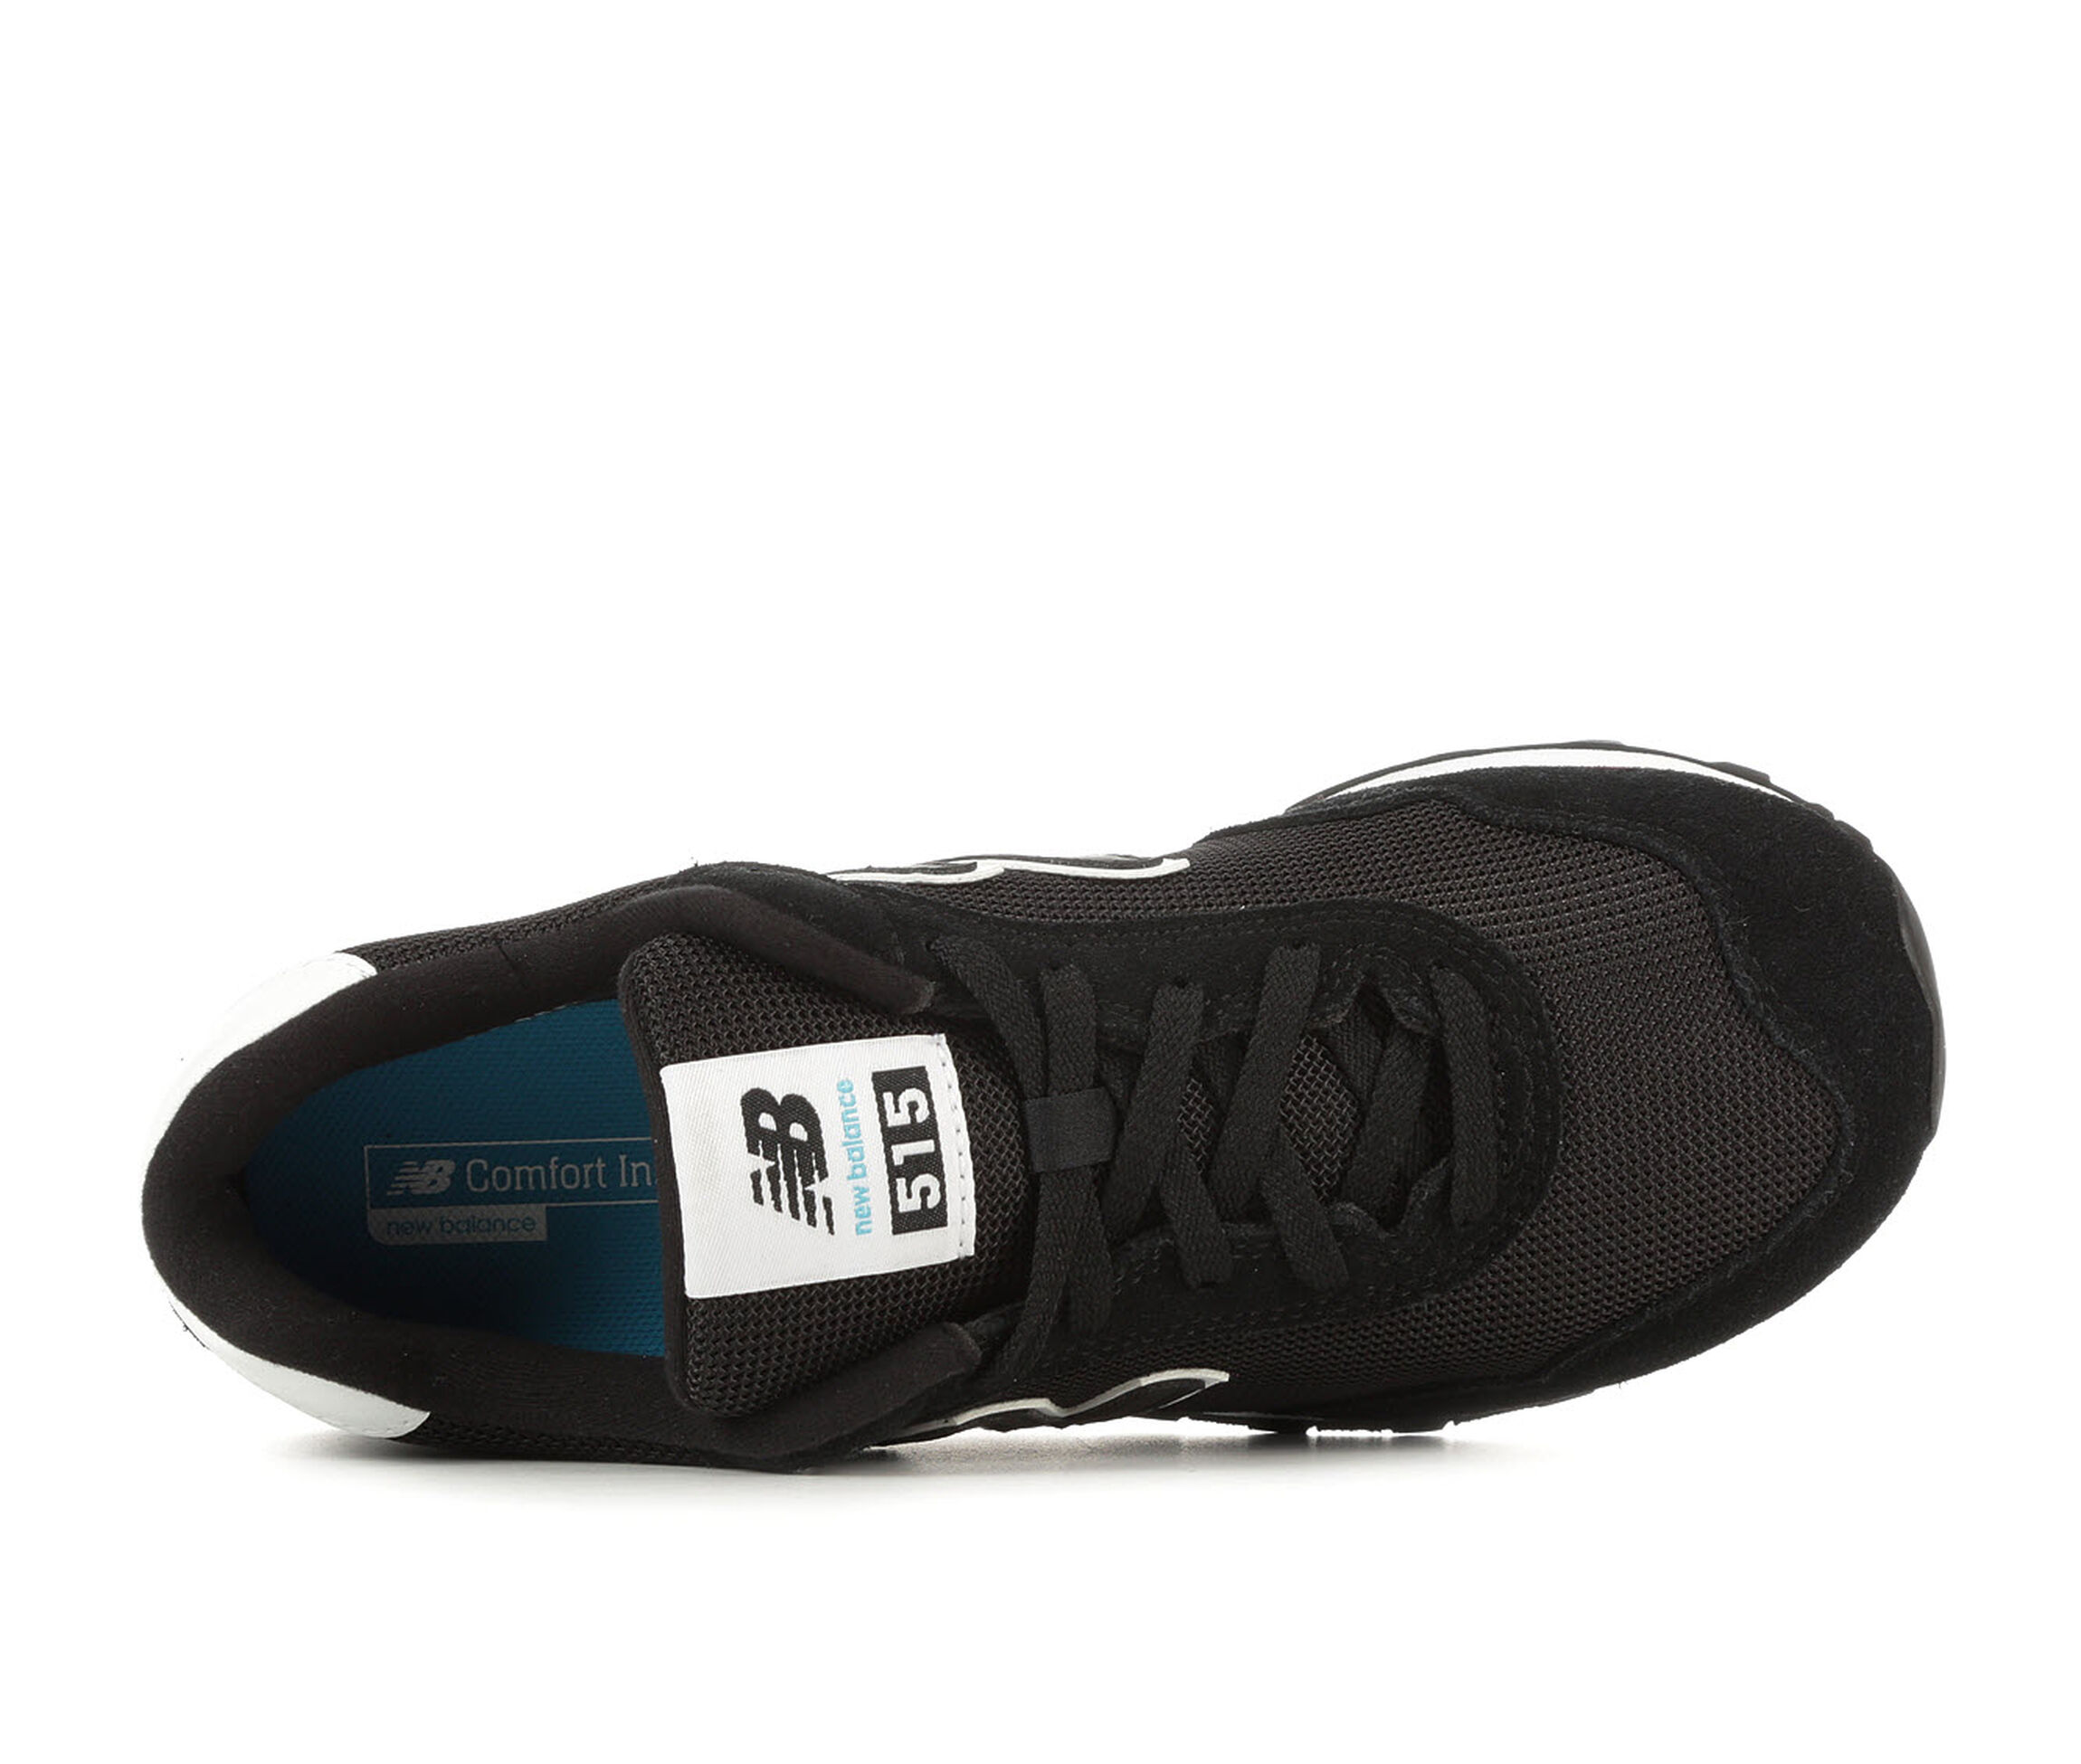 30% Off Select Men's & Women's Athletic Shoes and Sneakers